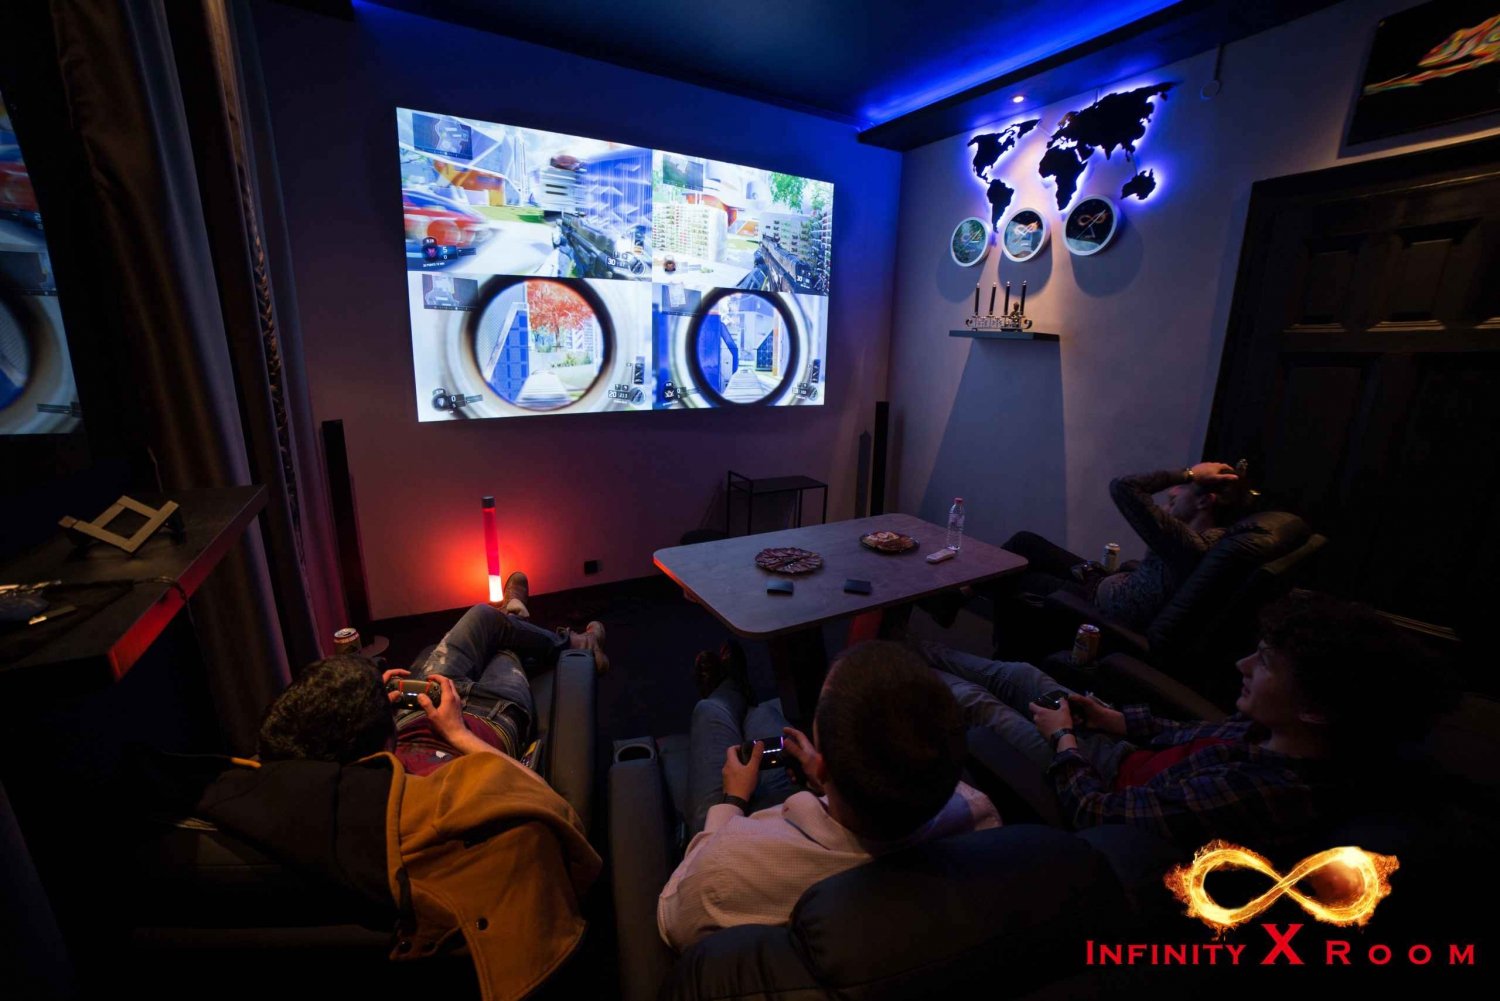 Infinity X Room - the ultimate gaming and cinema experience